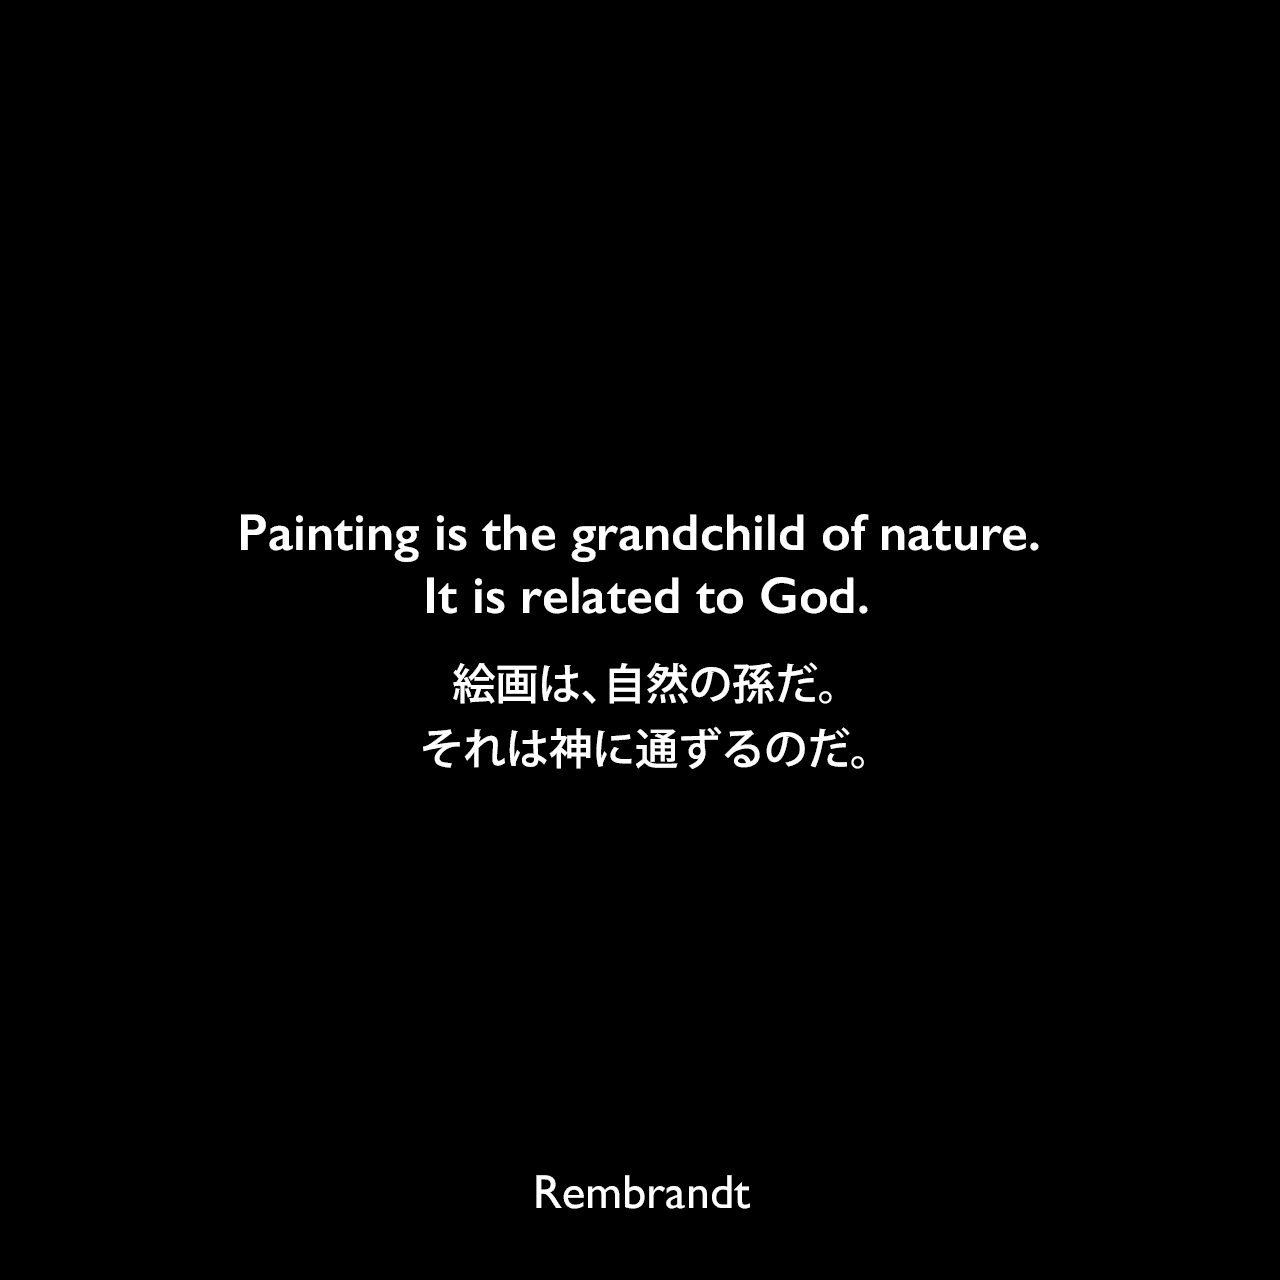 Painting is the grandchild of nature. It is related to God.絵画は、自然の孫だ。それは神に通ずるのだ。Rembrandt